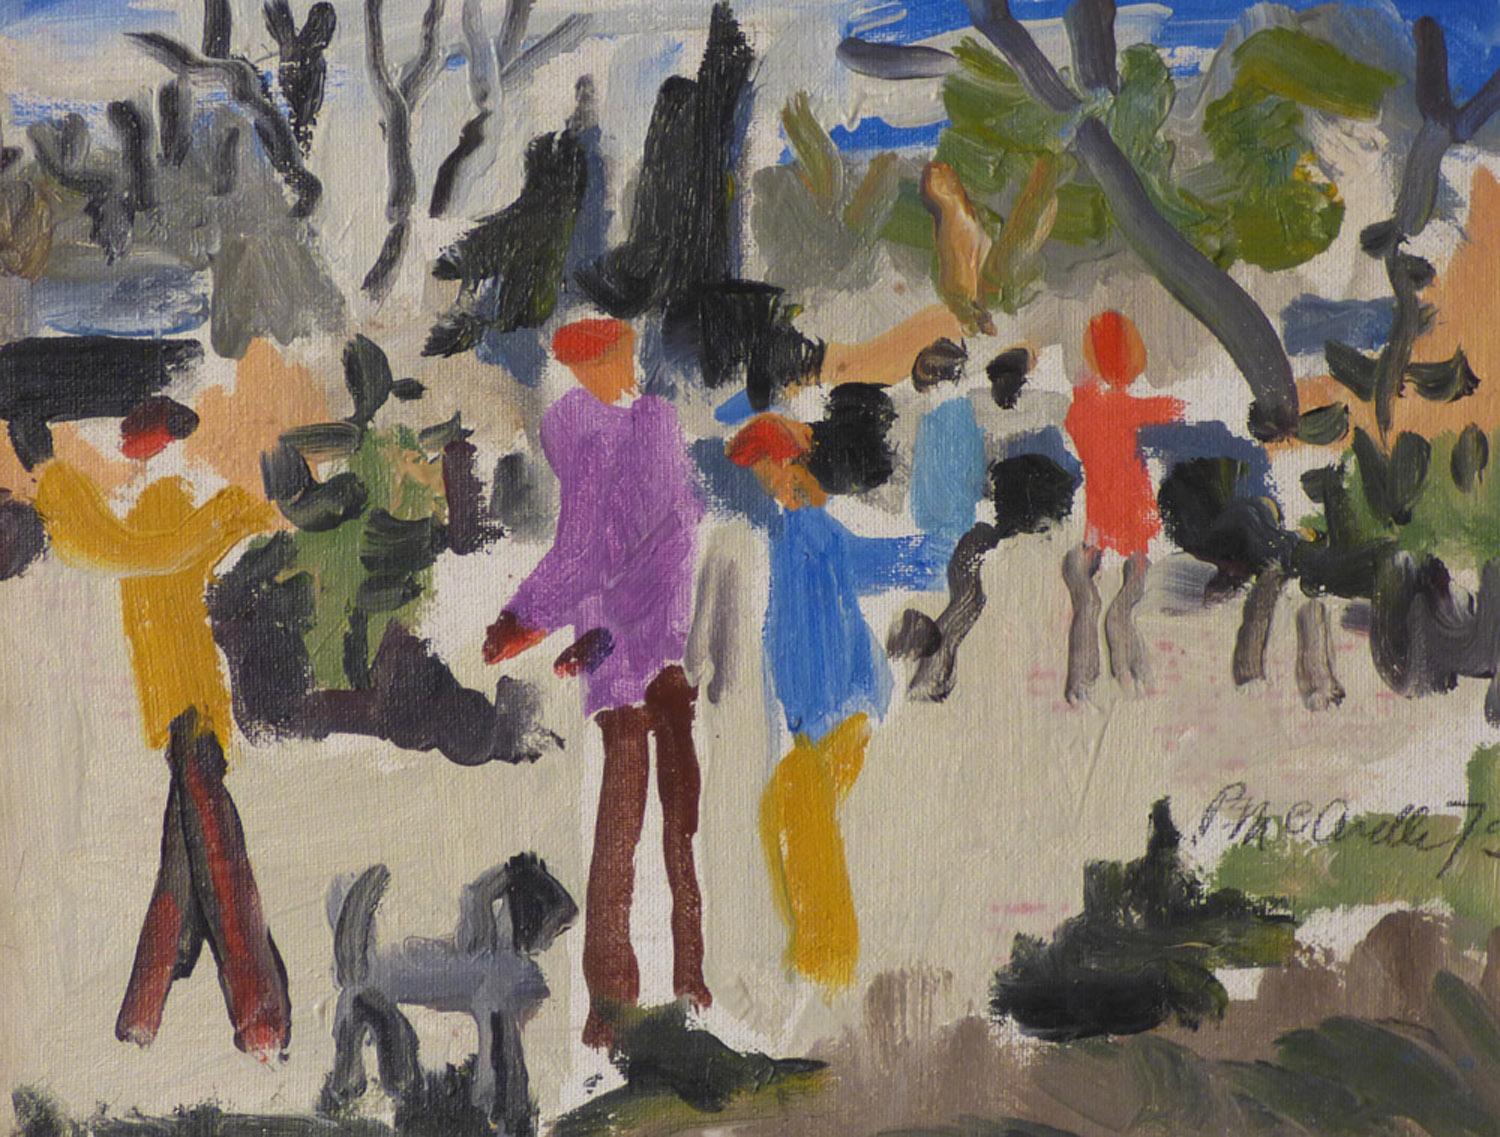 Patrick McArdle Landscape Painting - Skaters with Poodle